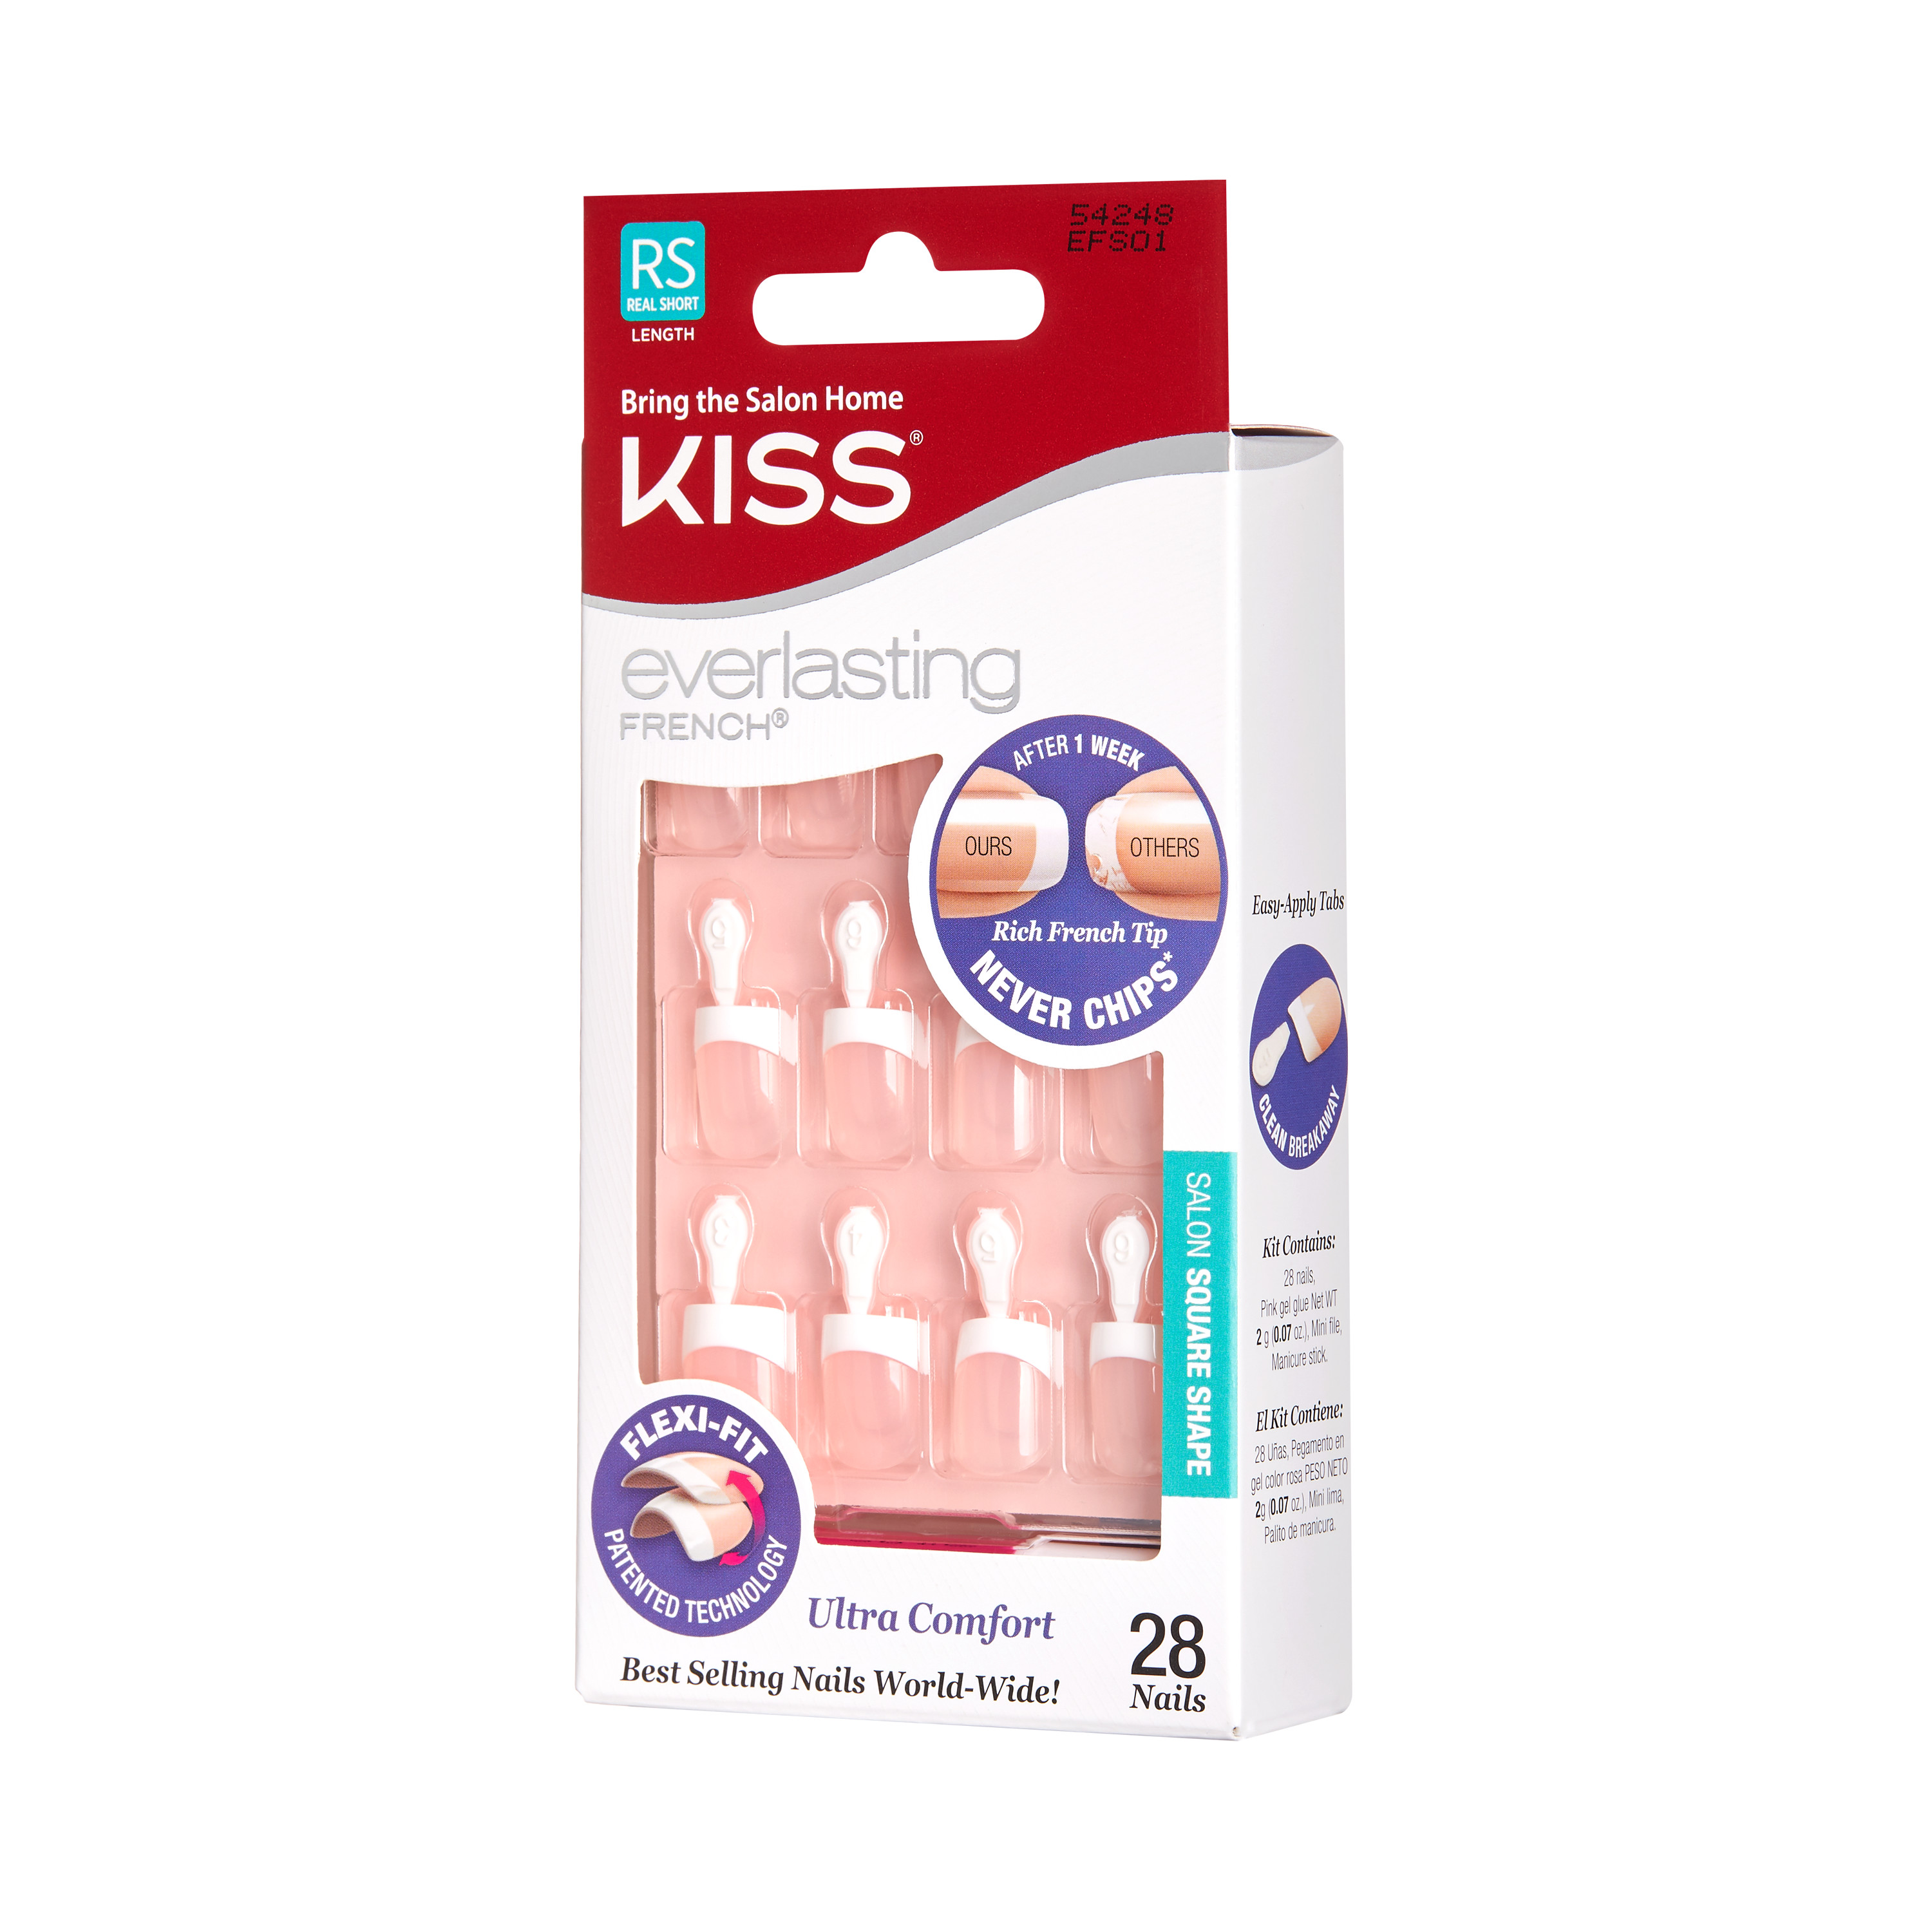 Kiss Everlasting French Nails - Clear Pink - image 2 of 9